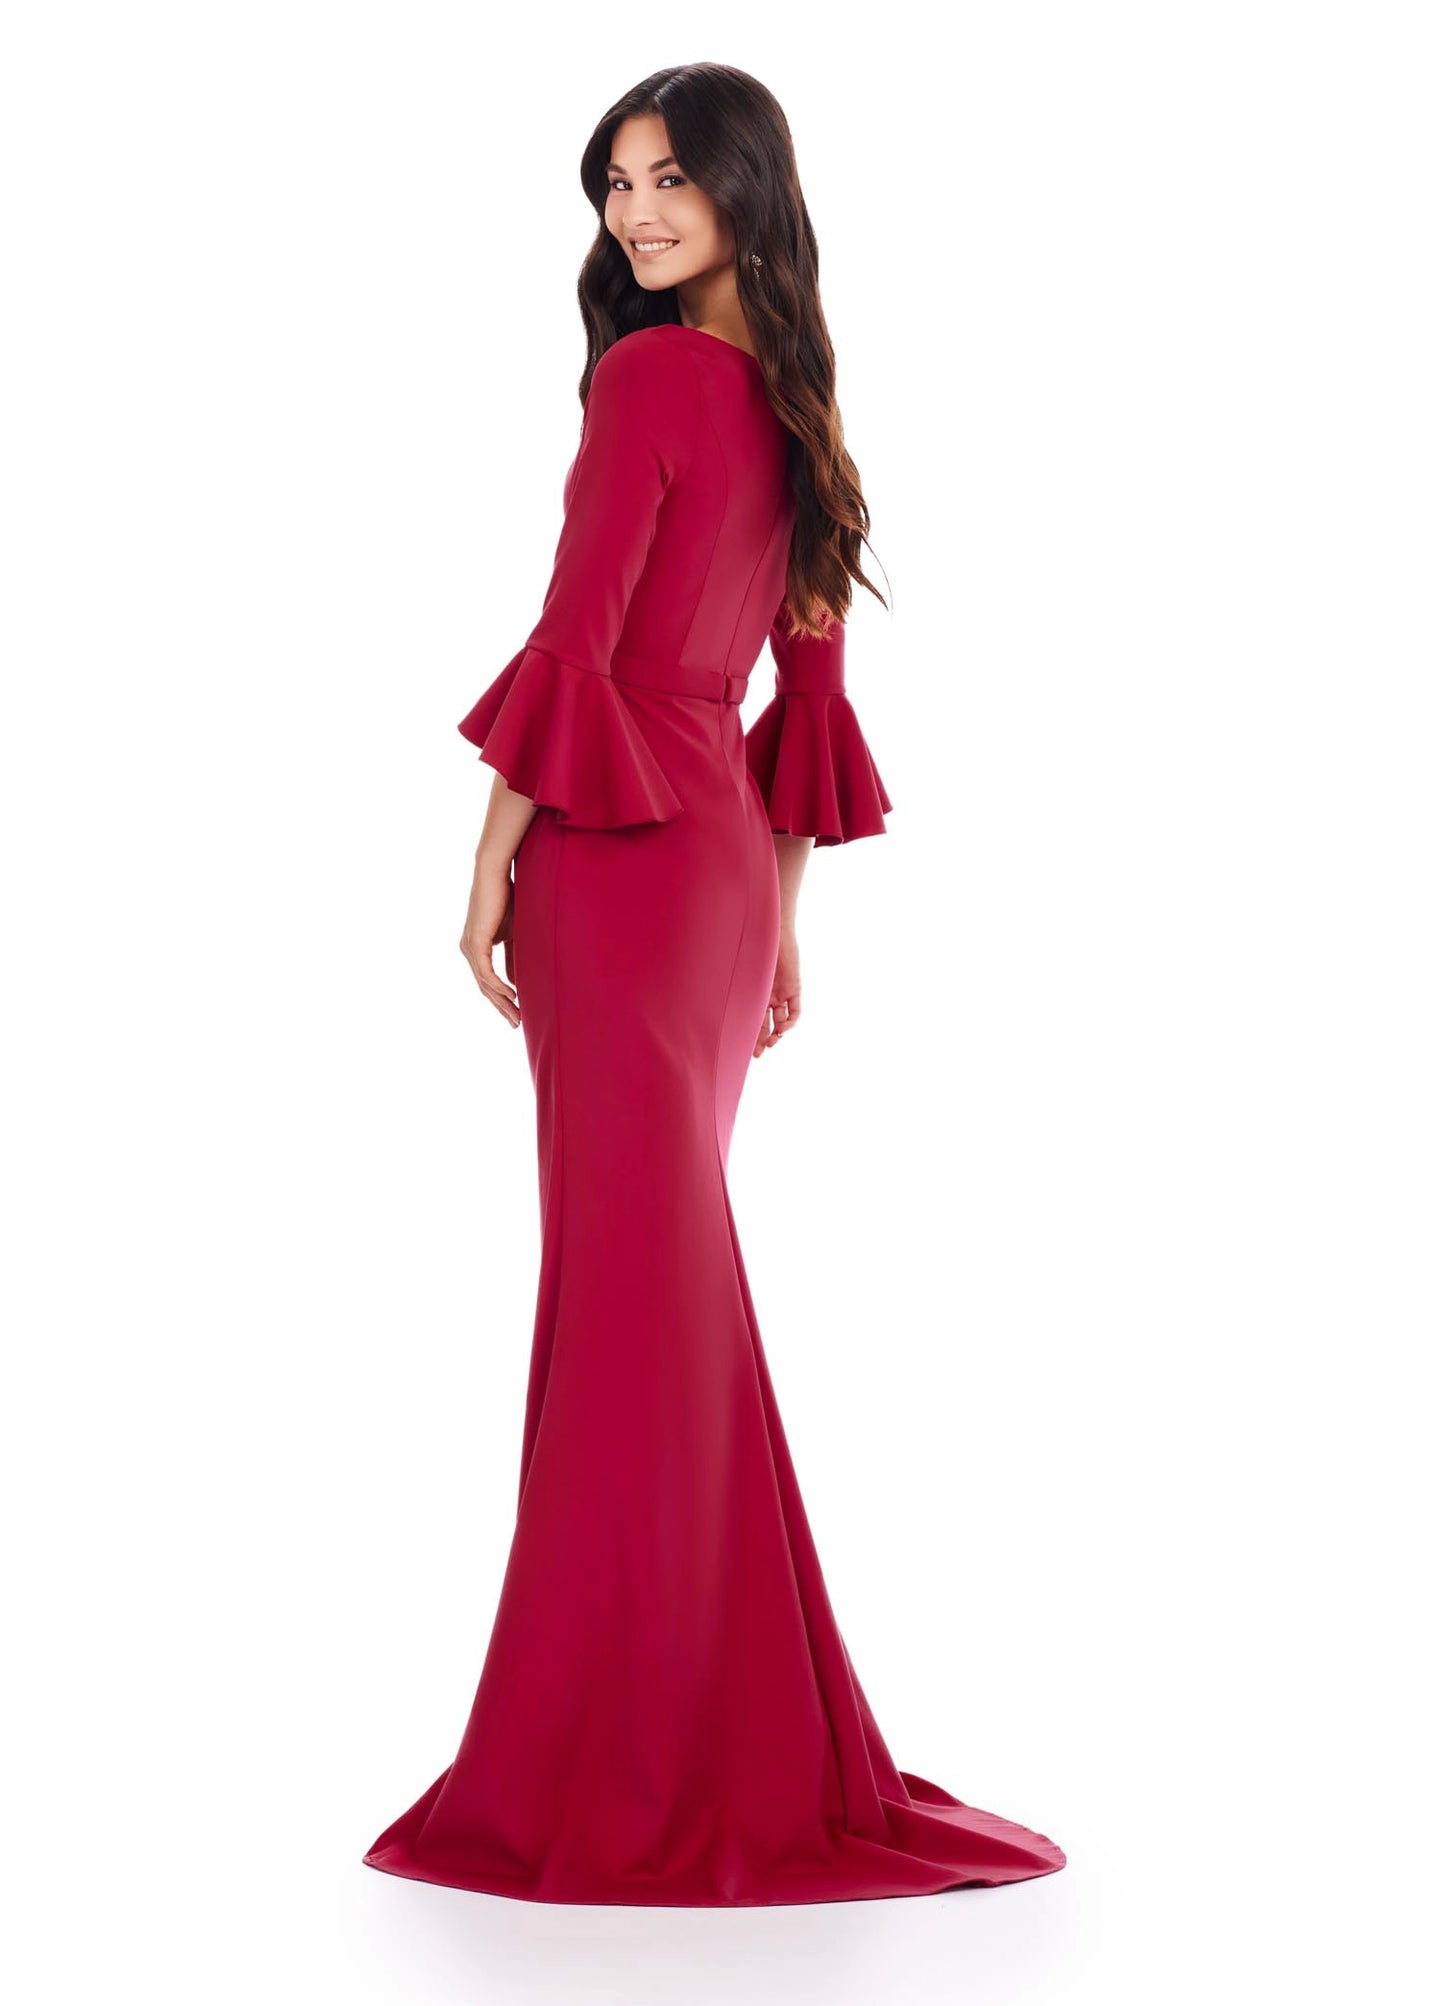 Ashley Lauren 11325 Crew Neck Three Quarter Flutter Sleeves Ruched Skirt Fitted Gown. This timeless and elegent evening gown features flutter three quarter sleeves. The skirt is adorned with ruching and finished with a sweep train.